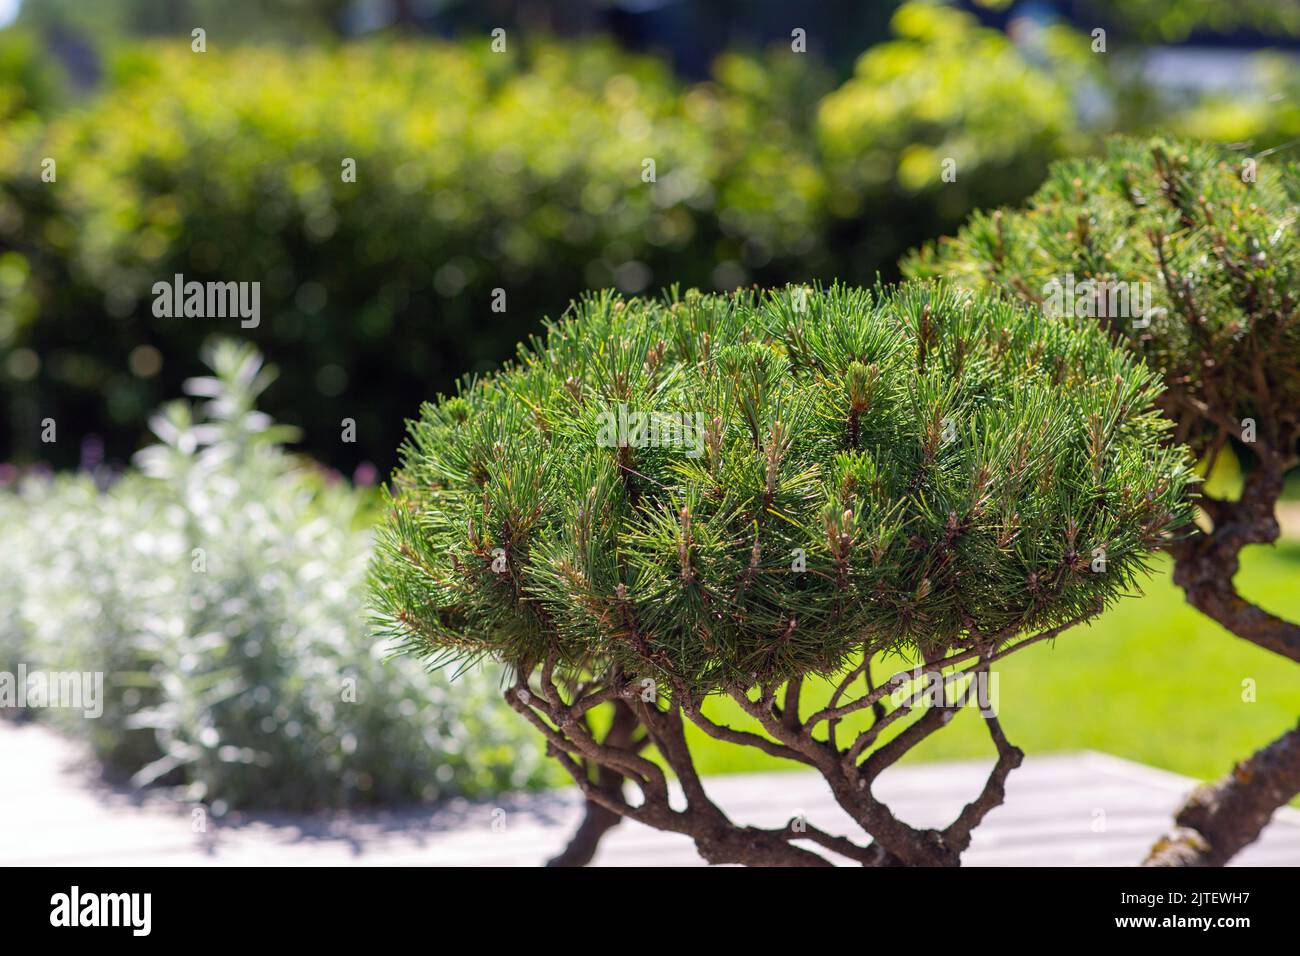 close up of dwarf pine trees at park or garden Stock Photo